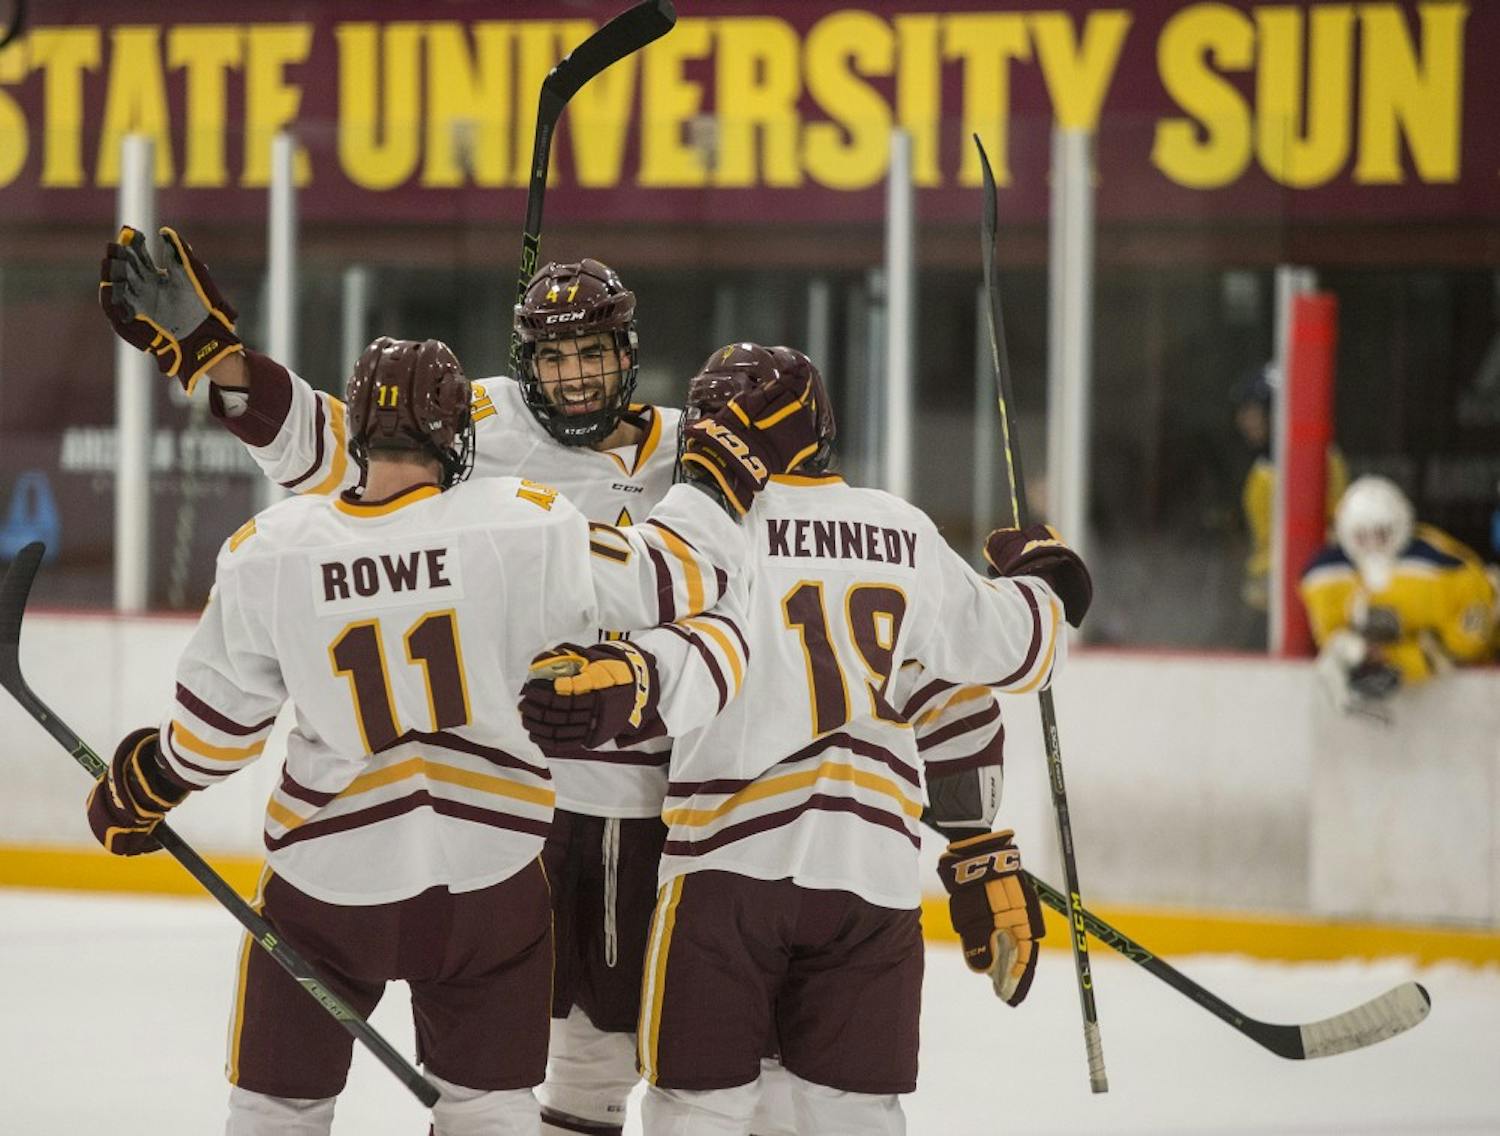 Left wing Jack Rowe, left, and center Matt Kennedy, right, celebrate a goal by defender Nicholas Gushue, center, during a game at the Oceanside Ice Arena in Tempe, Ariz. The Sun Devils lead Southern New Hampshire 4-1 after the first period. 